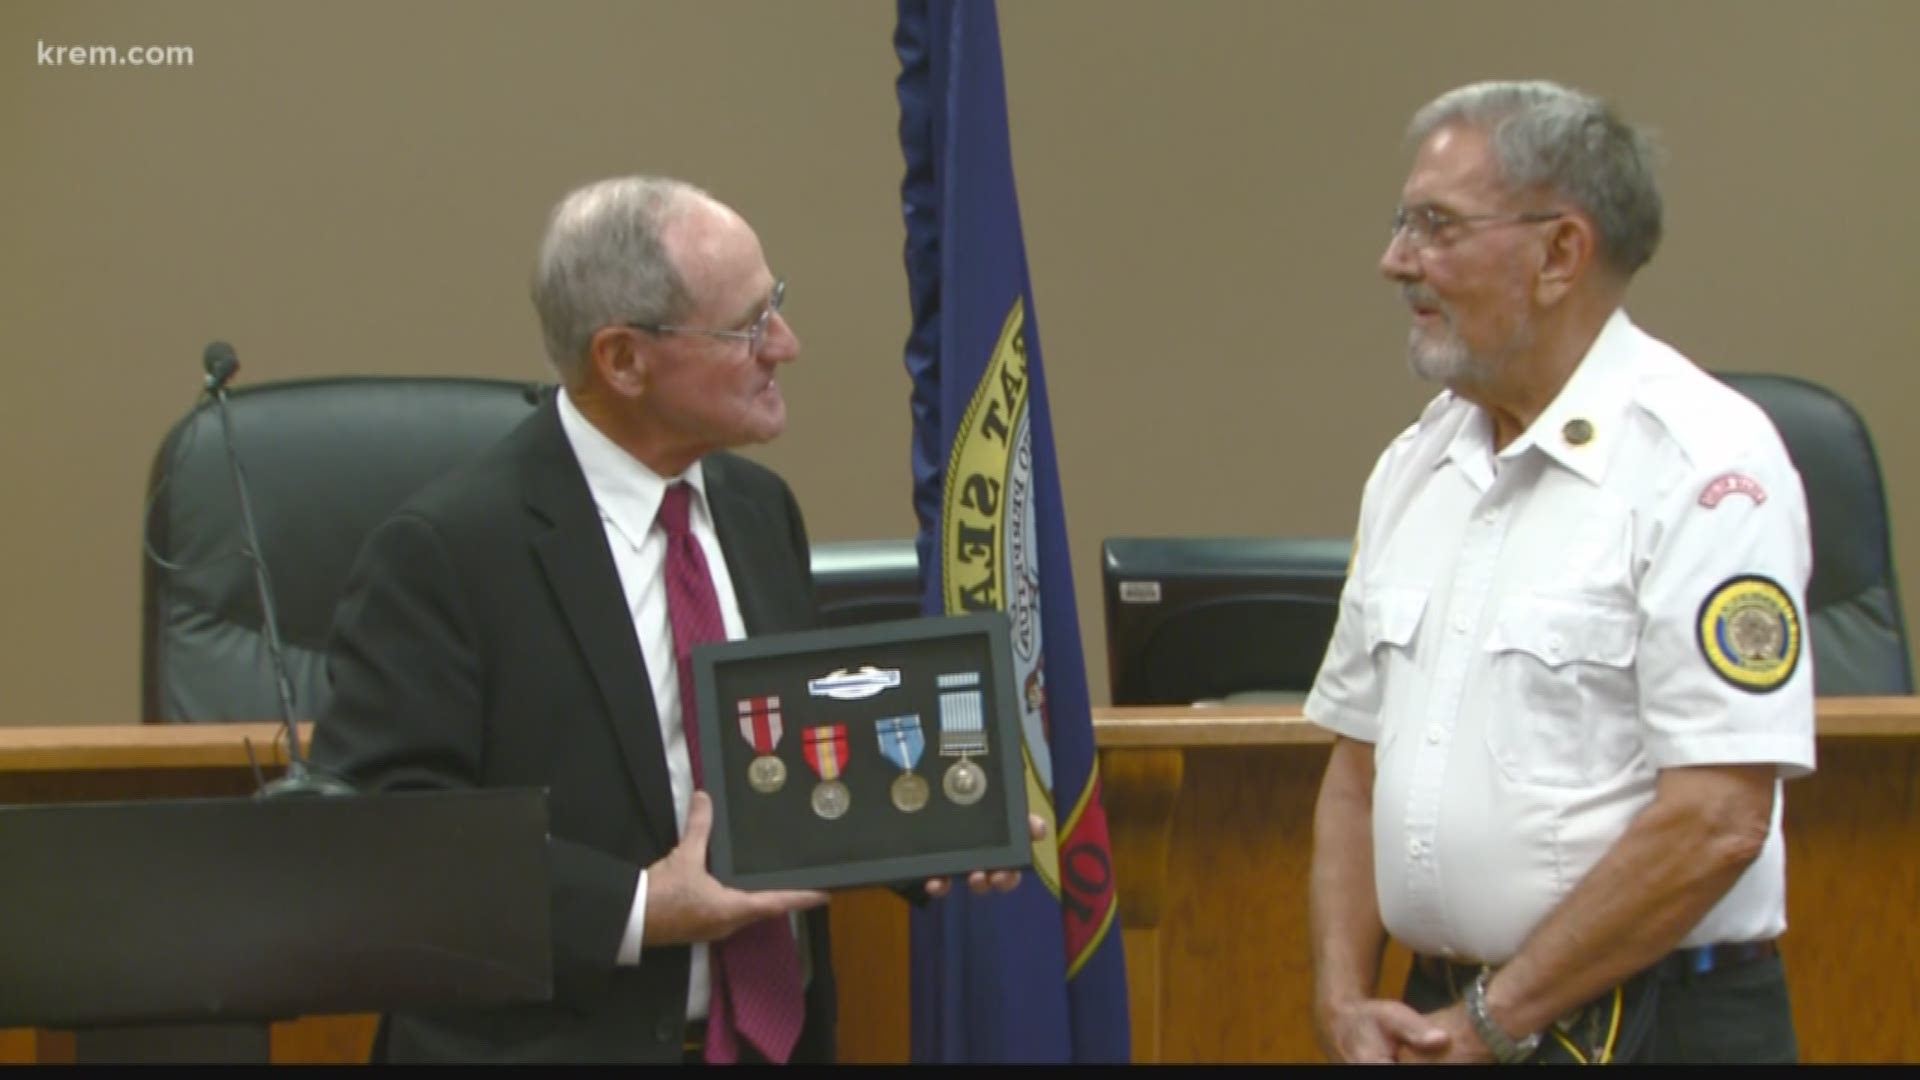 A Korean War veteran in Hayden, Idaho lost the medals he earned during his time in the military. A ceremony was held for him where the medals were replaced.